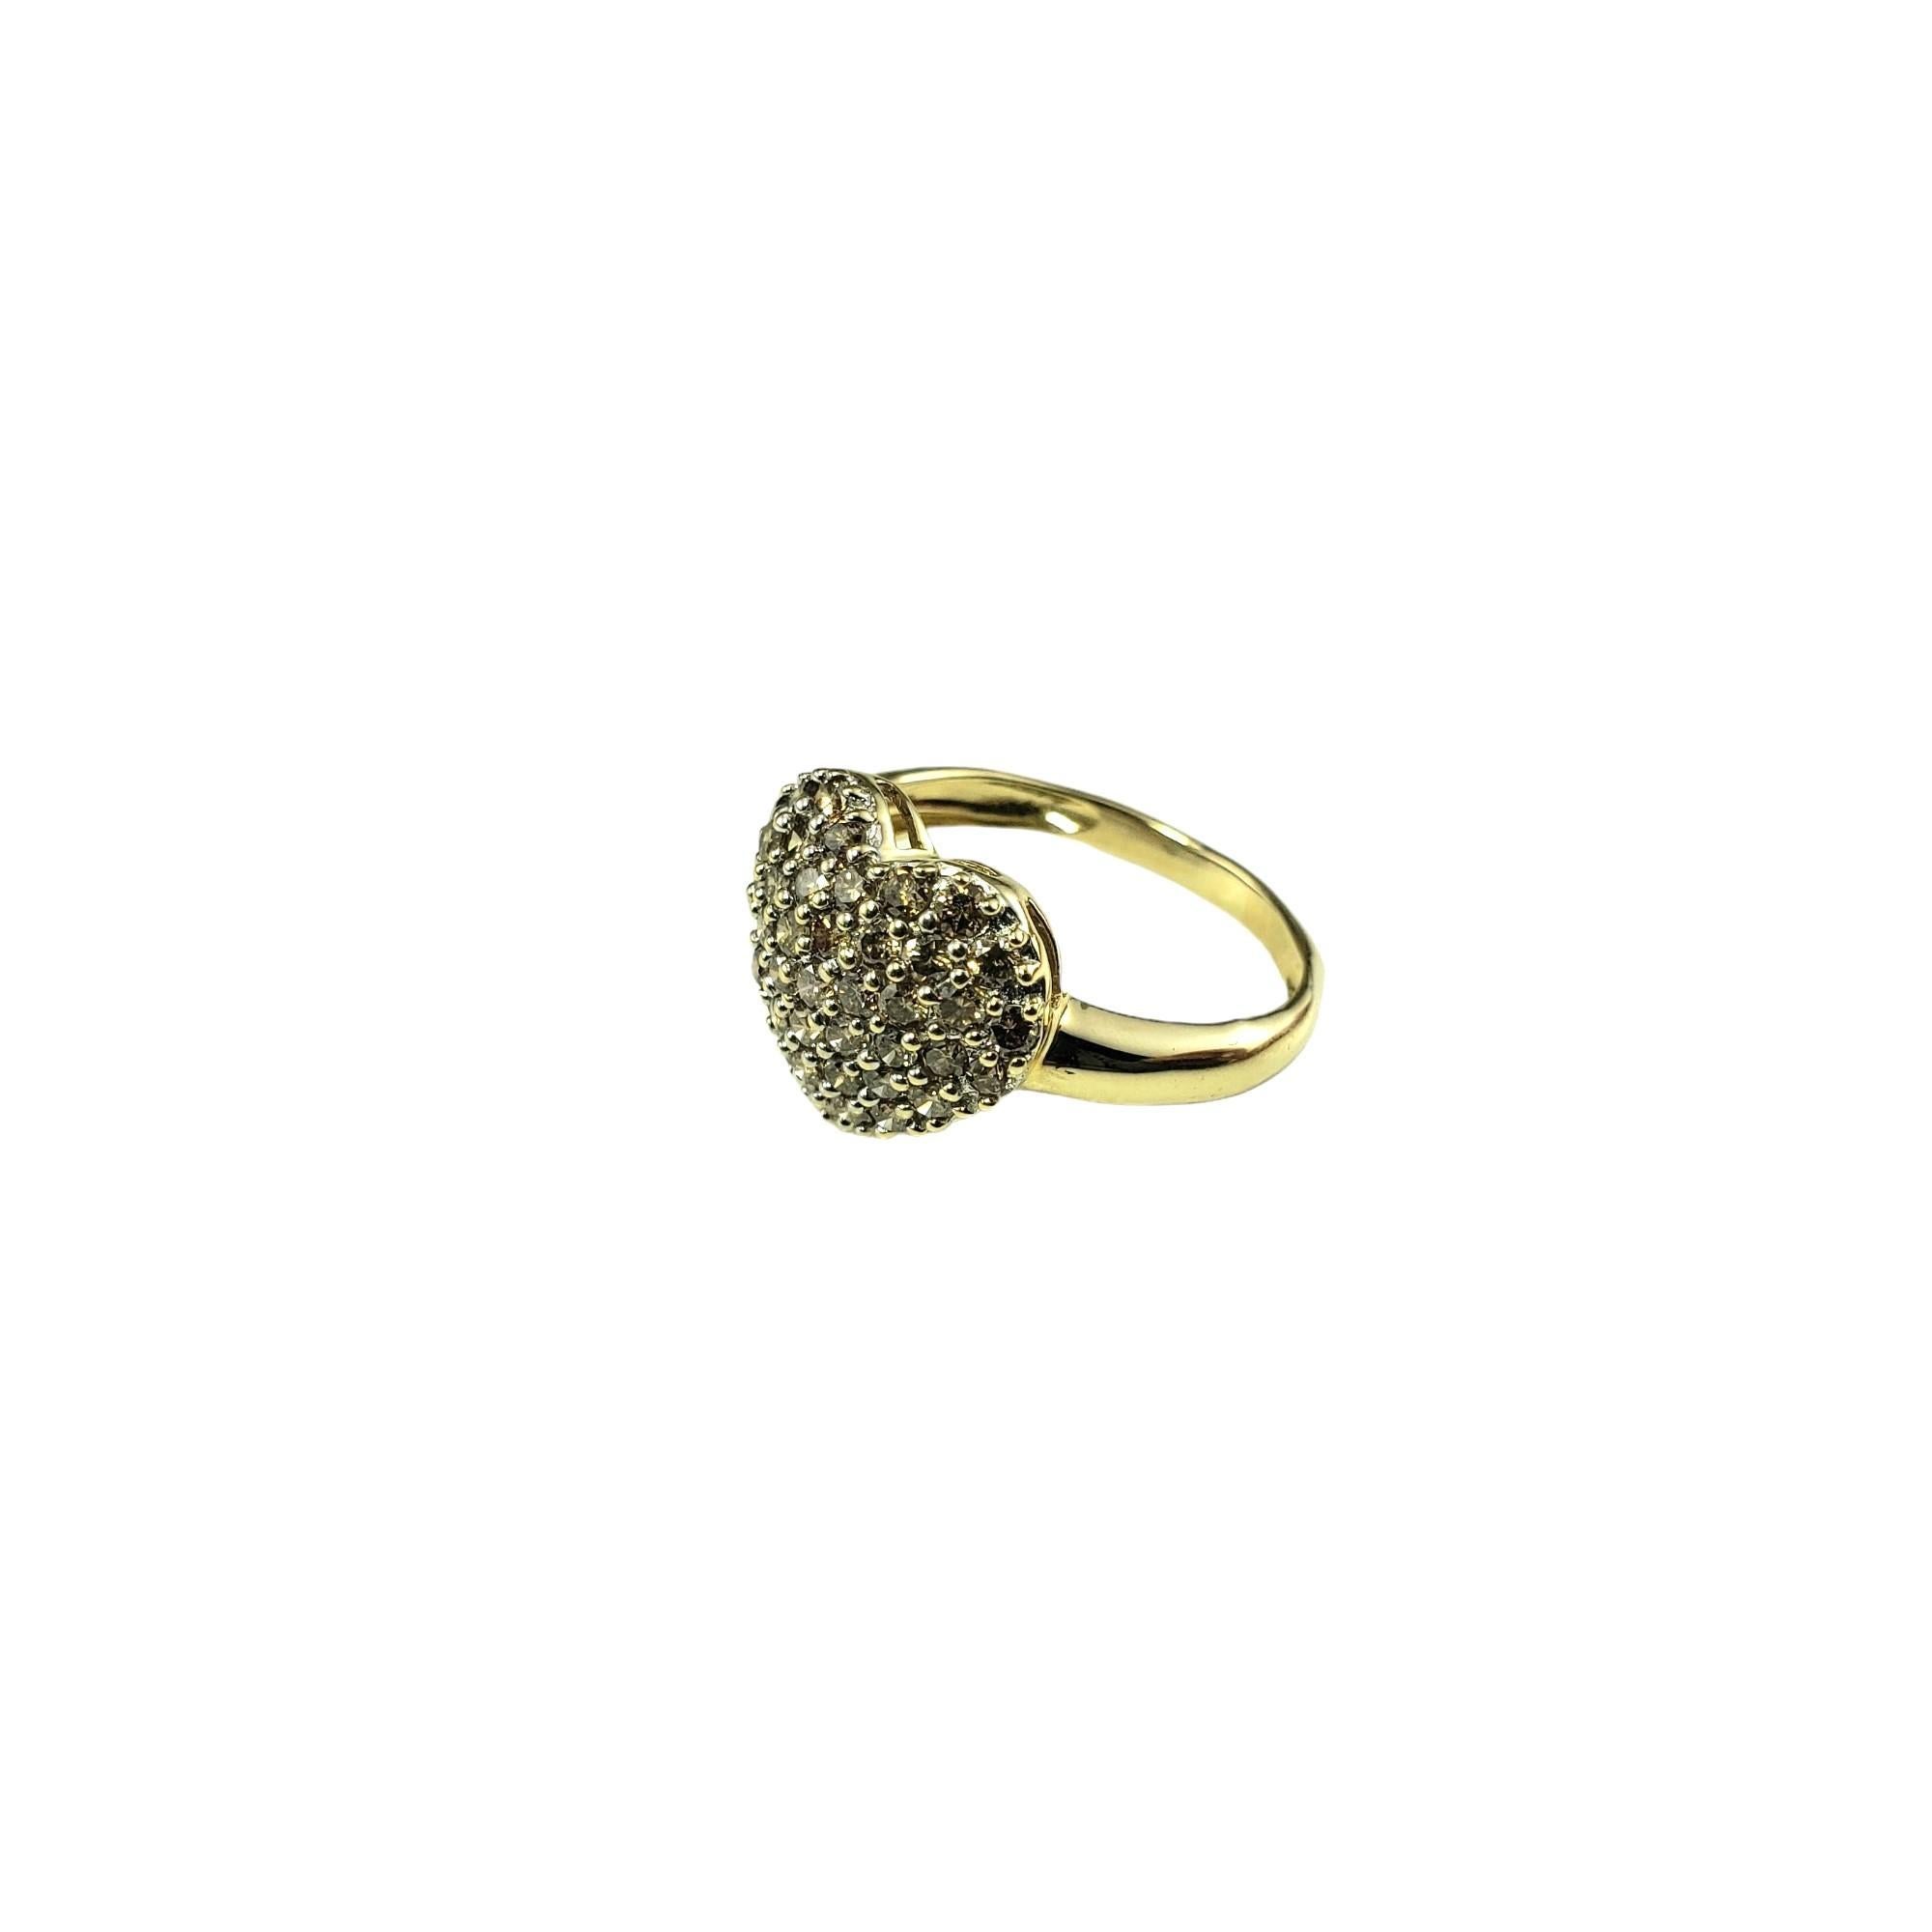 Round Cut 14K Yellow Gold Diamond Heart Ring Size 7 #16348 For Sale